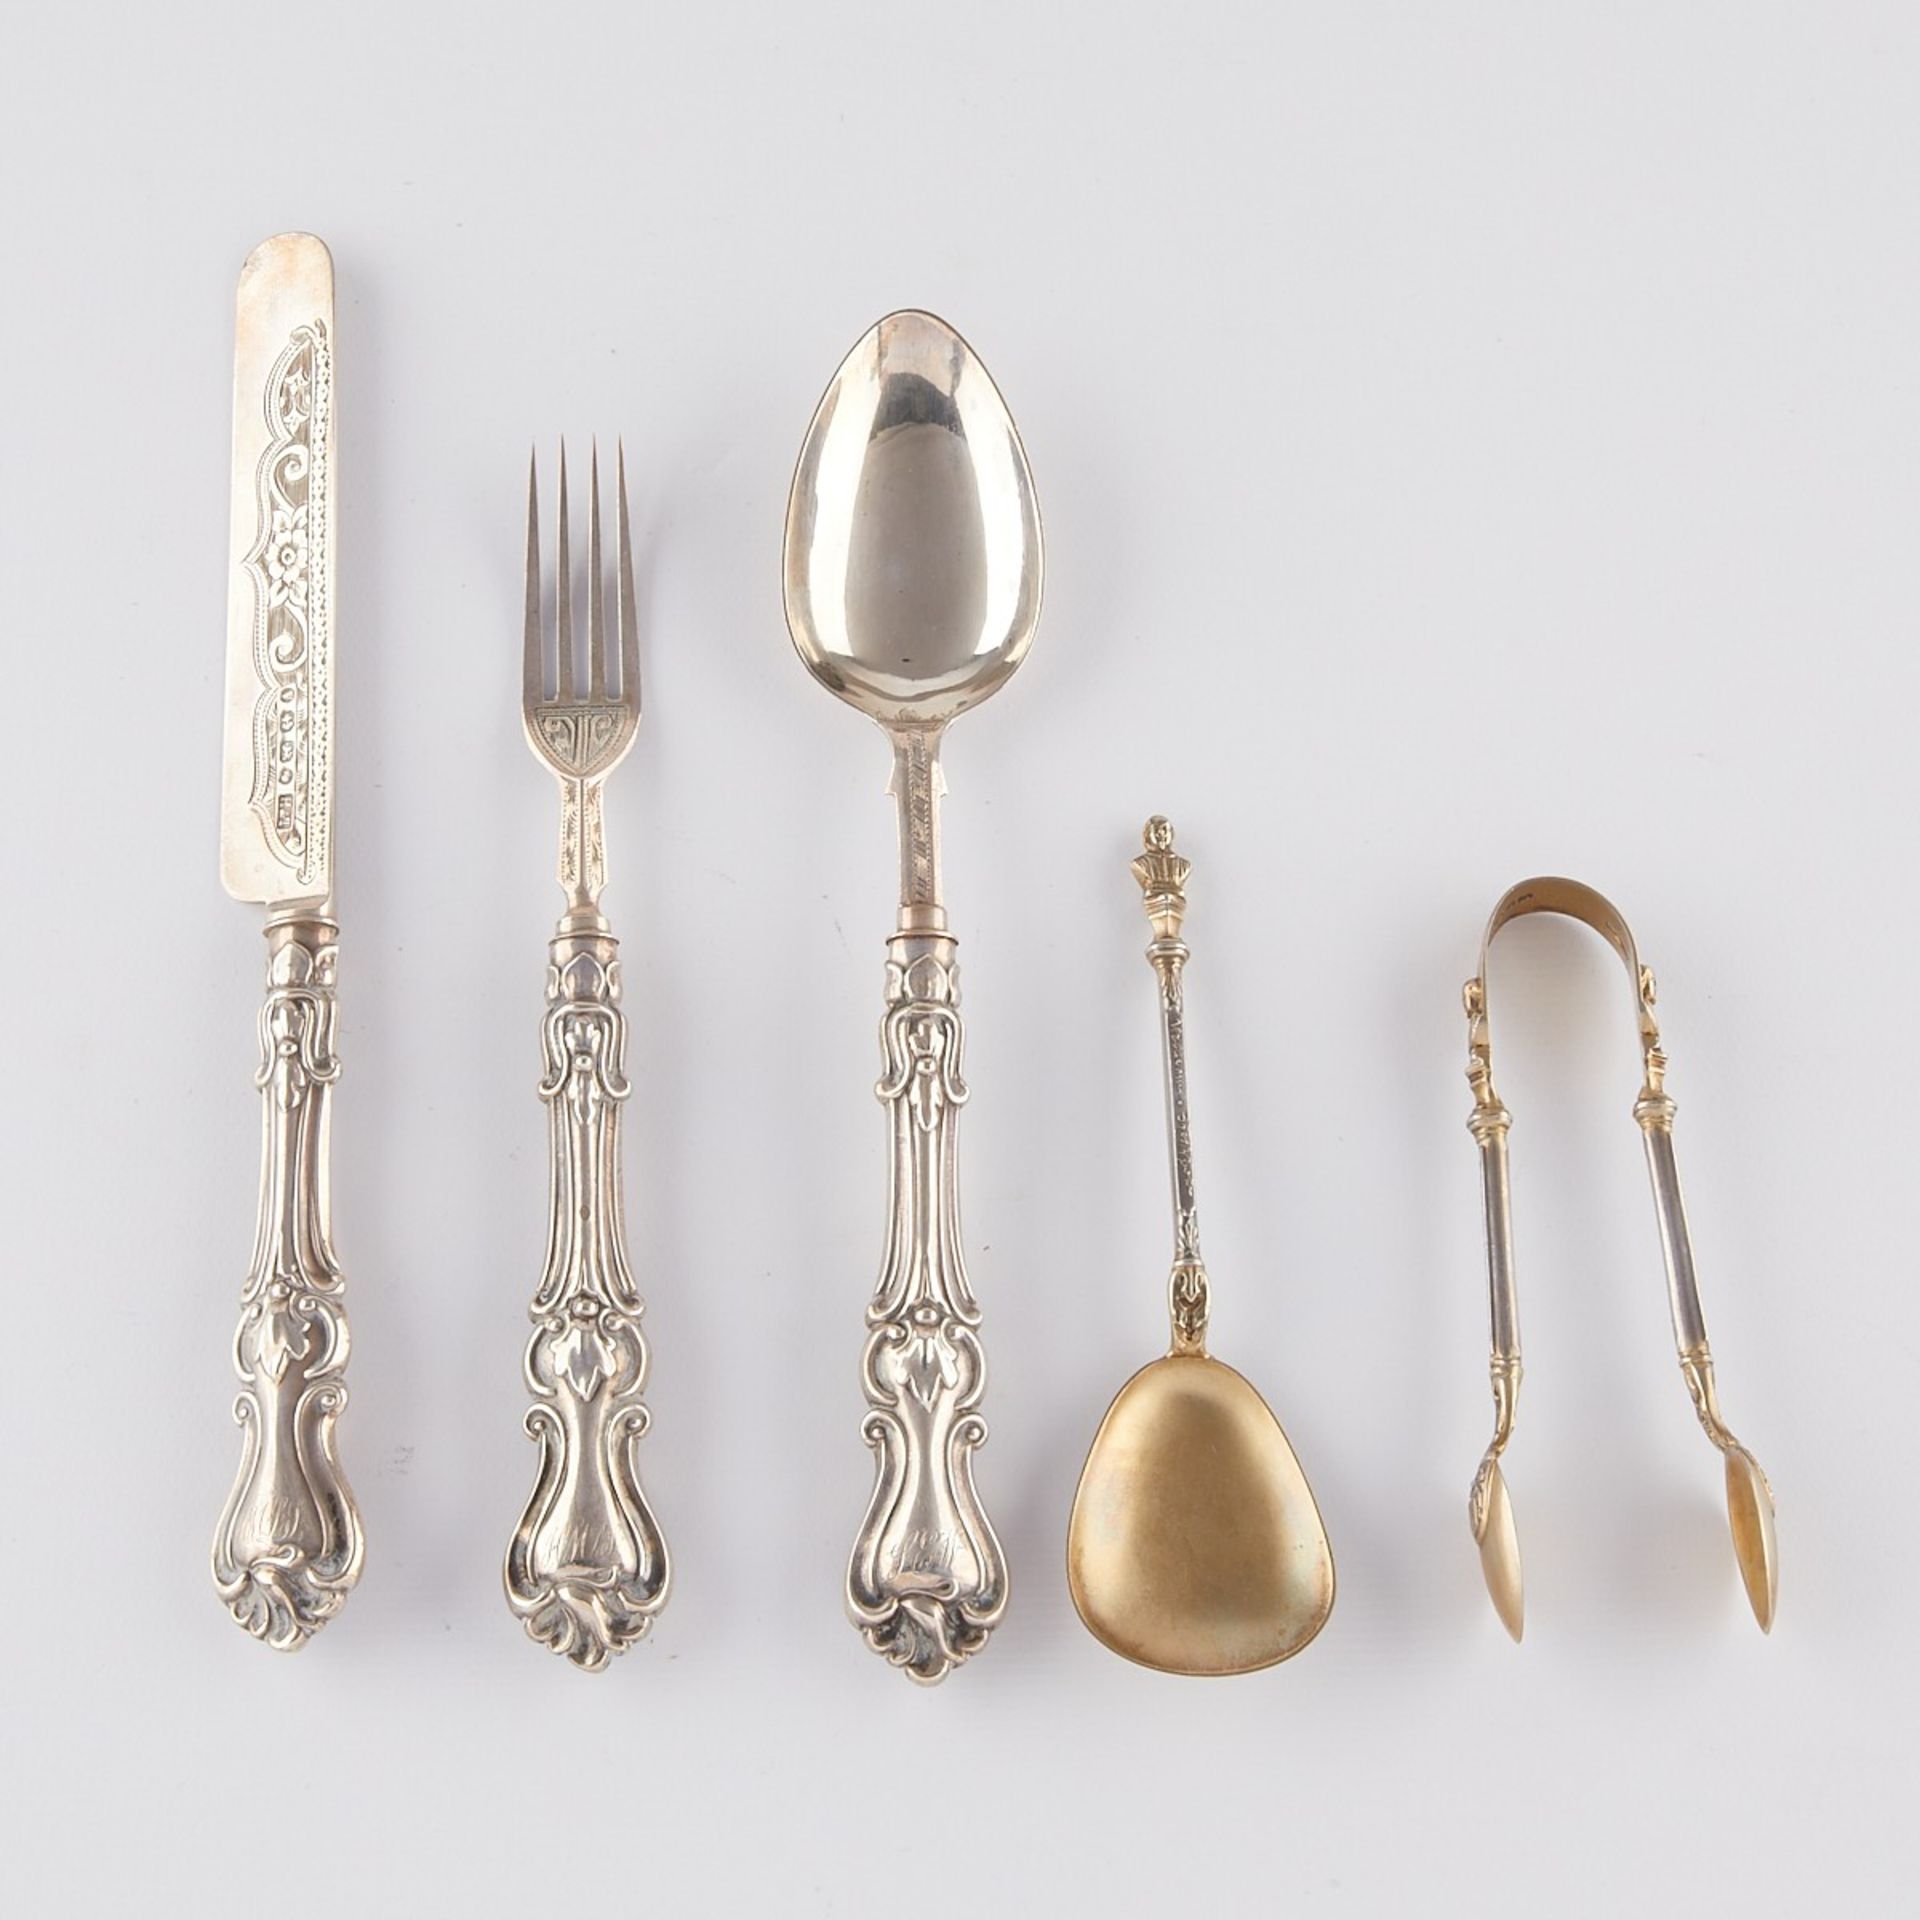 5 Sterling Silver English Serving Ware - Image 2 of 9